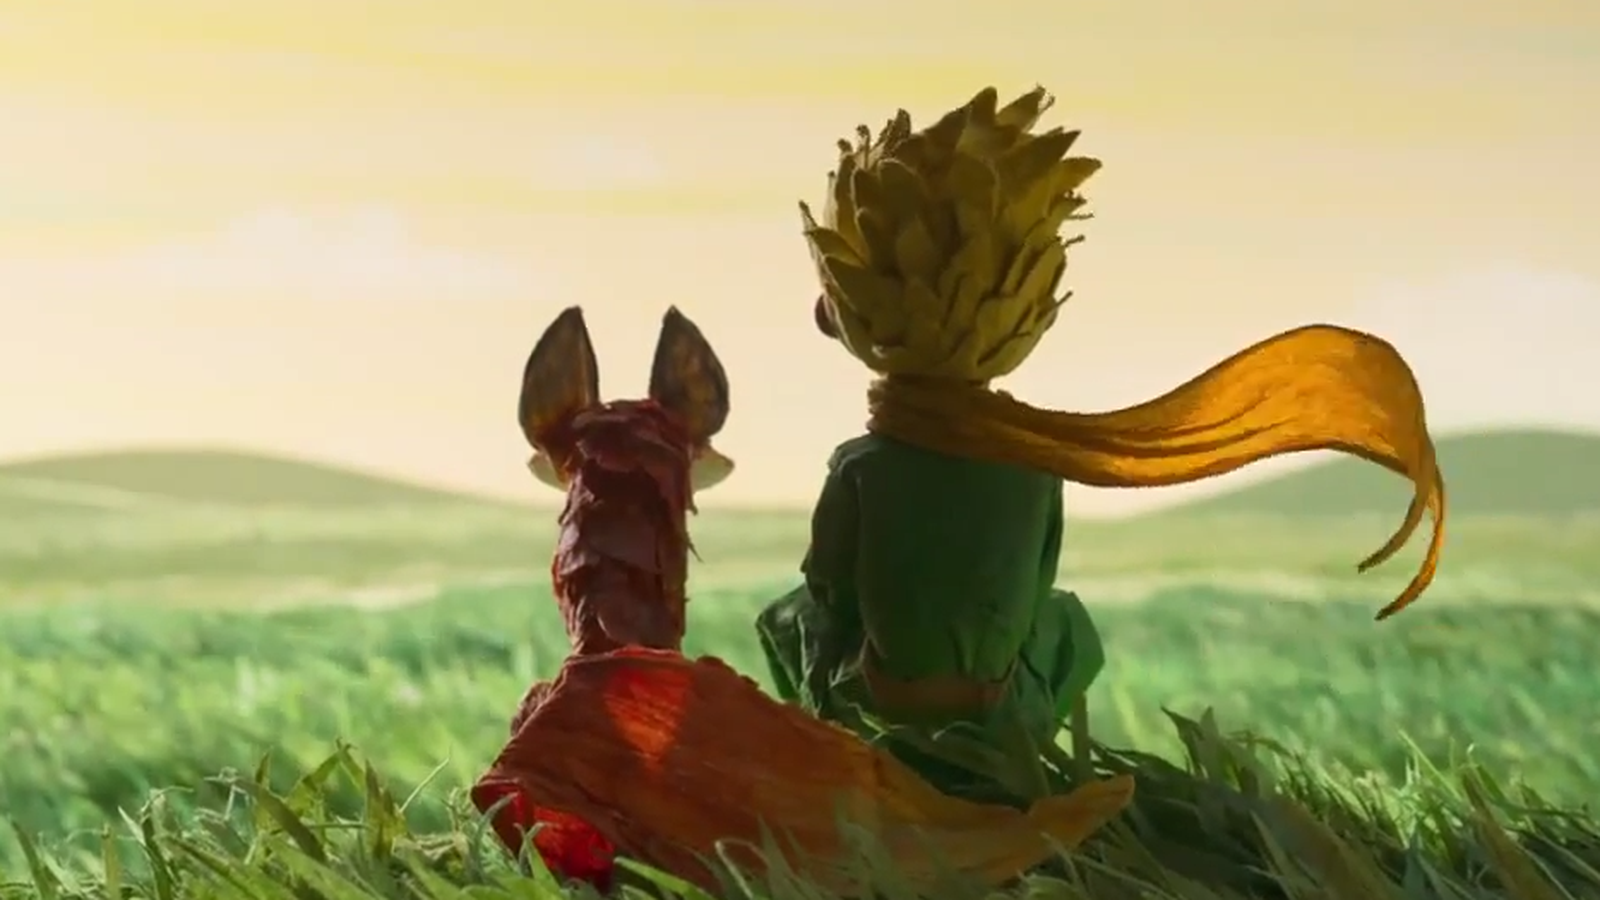 first impressions: Le Petit Prince